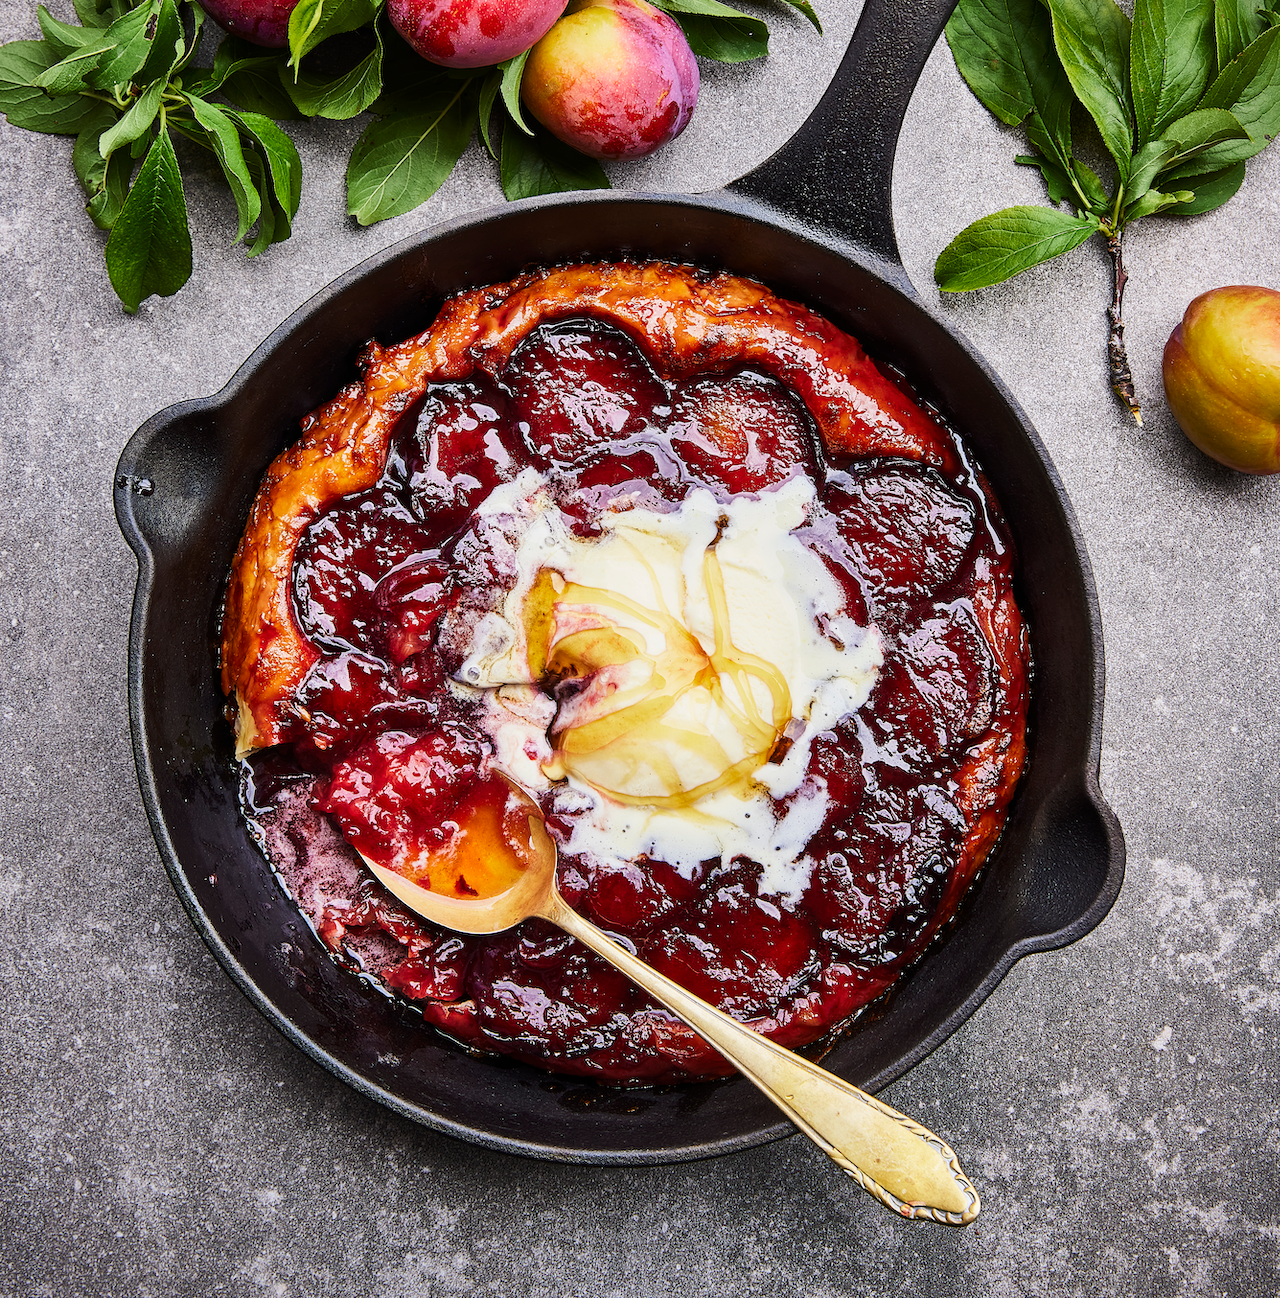 Making the most of this season's juicy plums